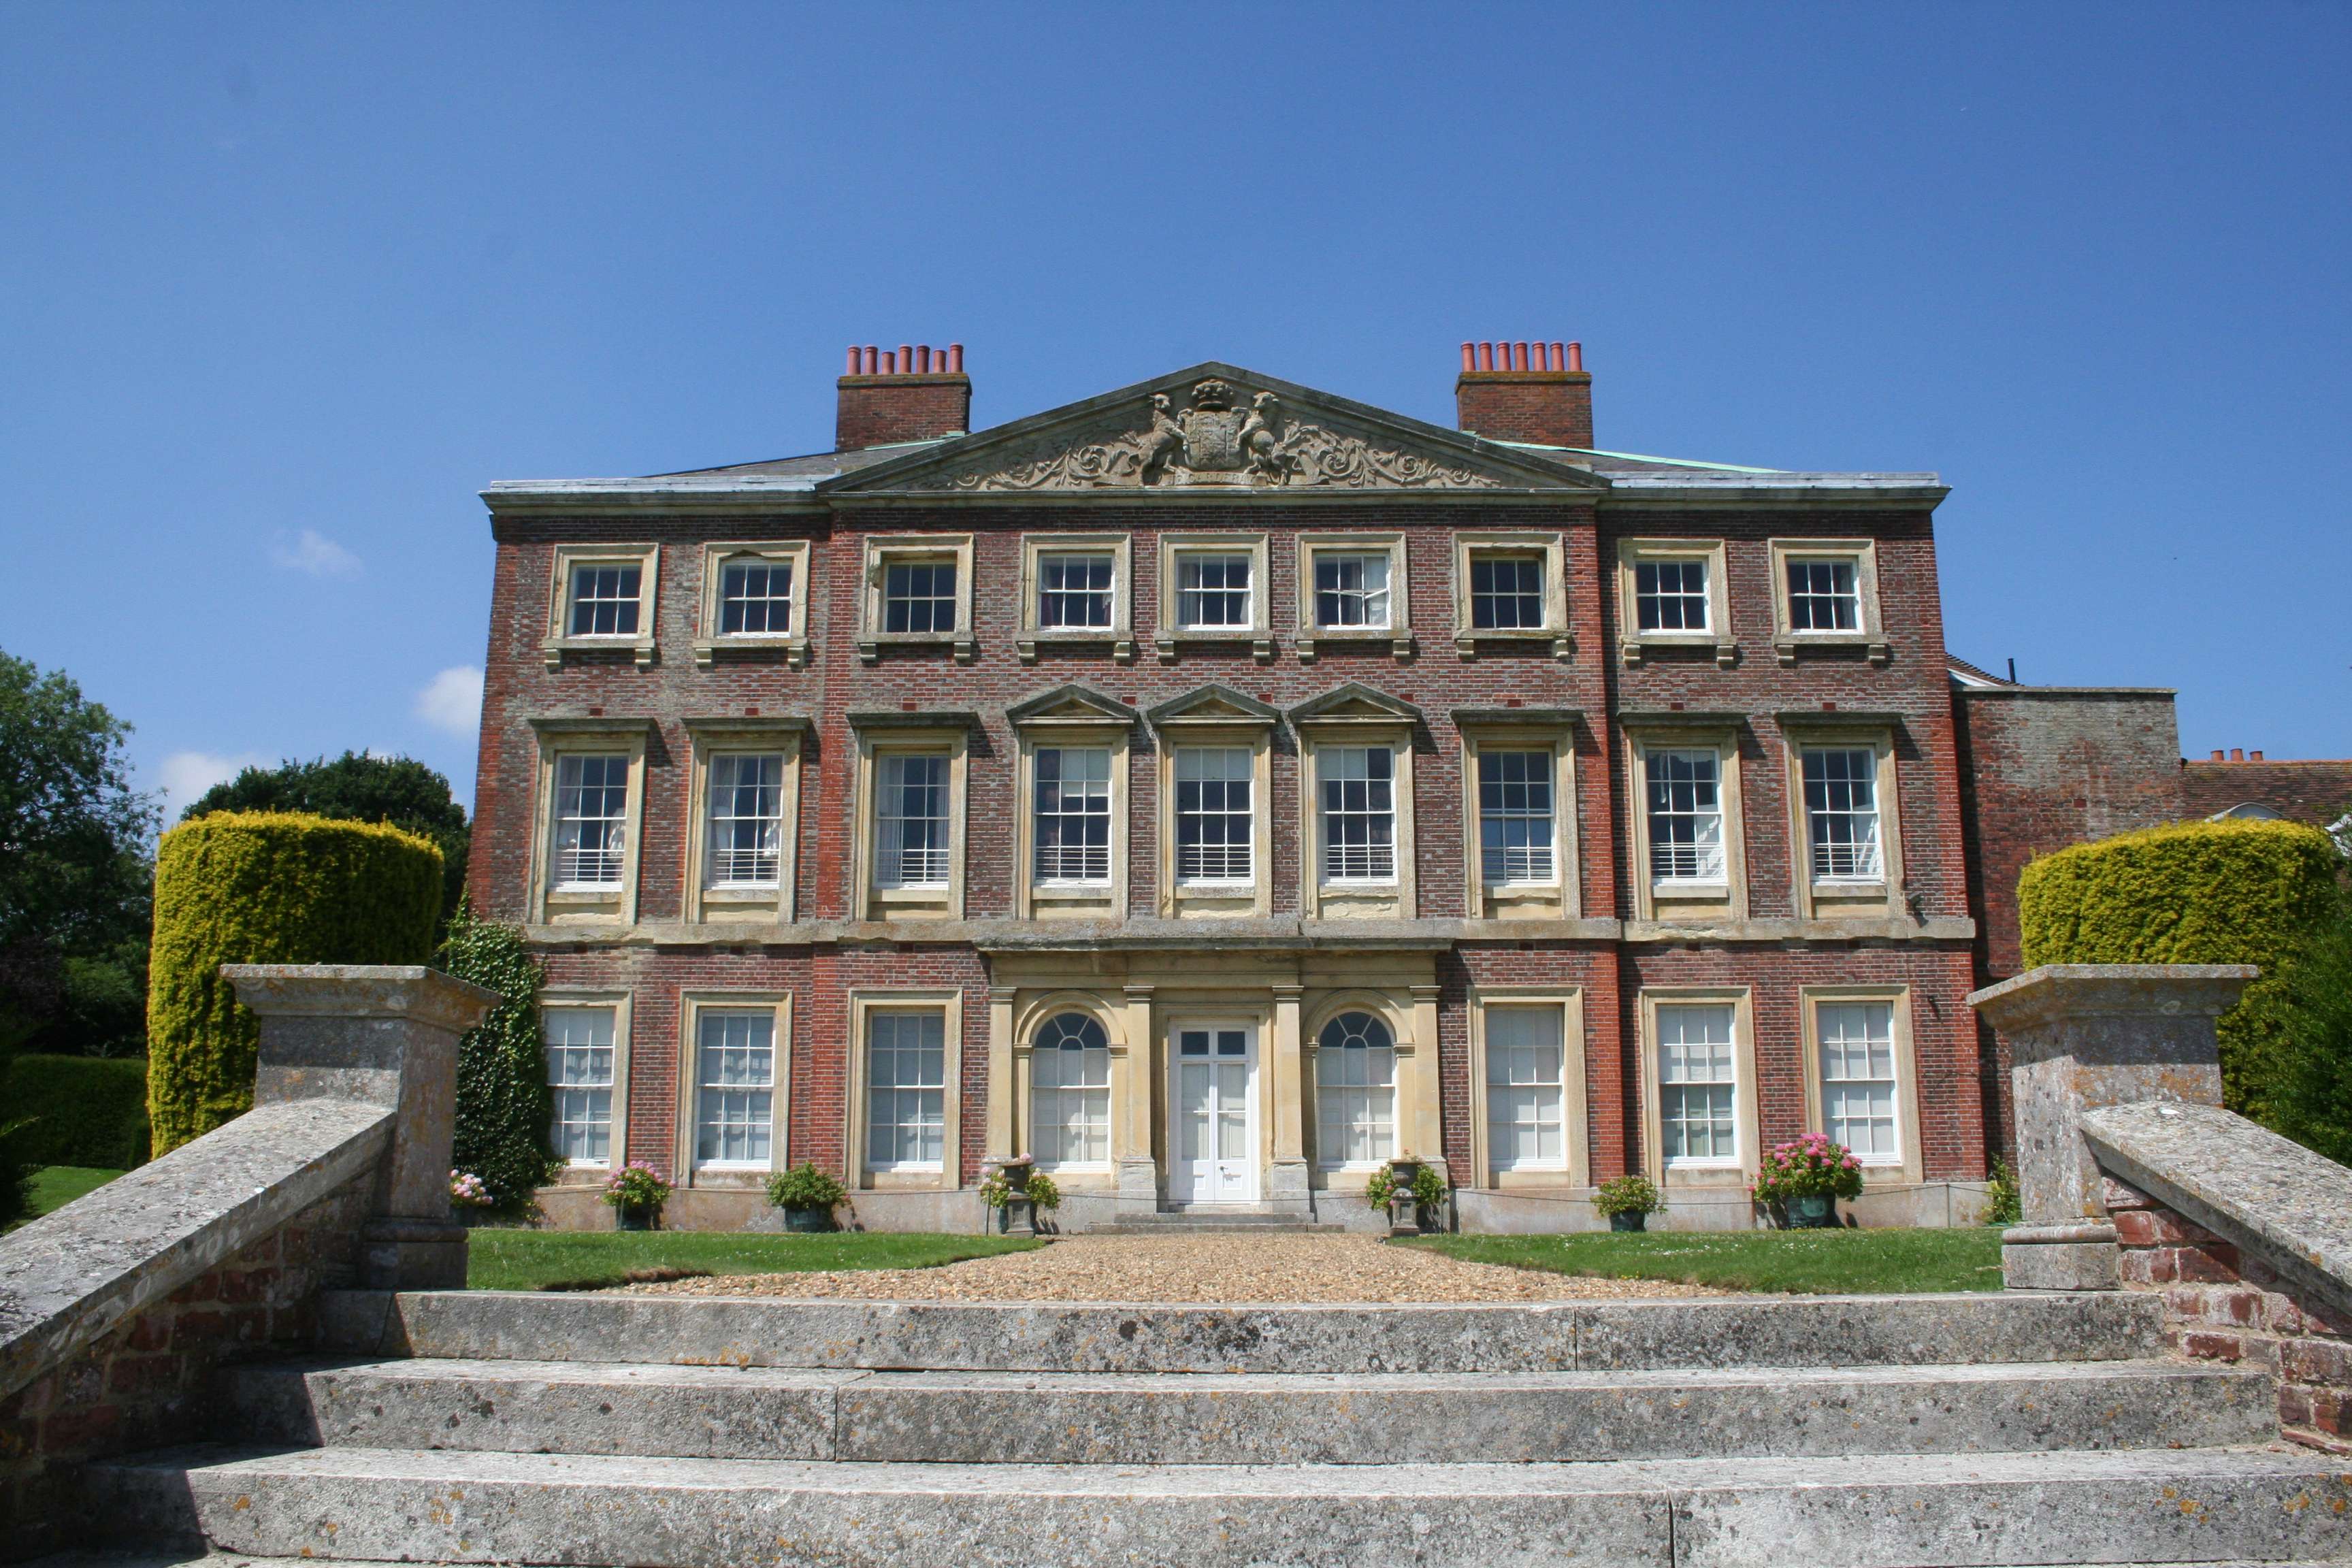 Image of Goodnestone Park house - a large red brick house with a blue sky behind